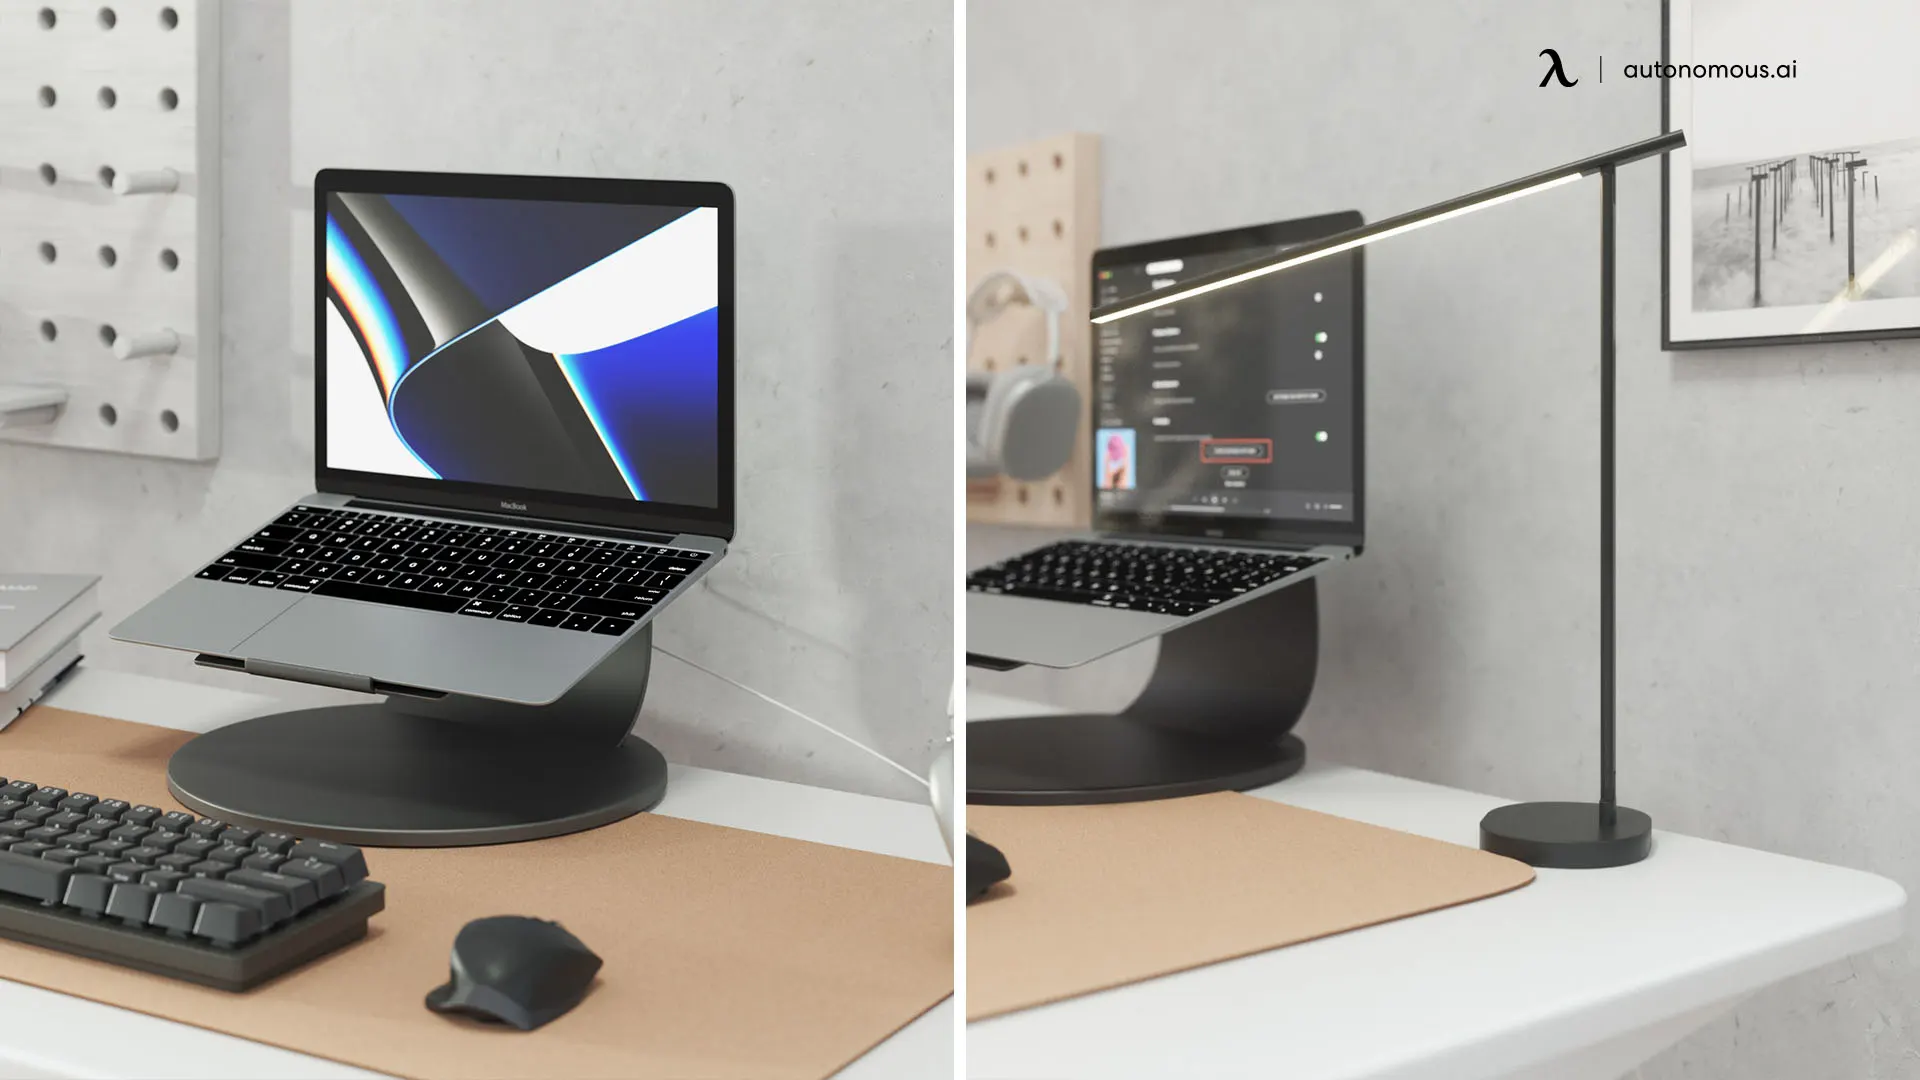 What Makes LED Desk Lamps Beneficial?